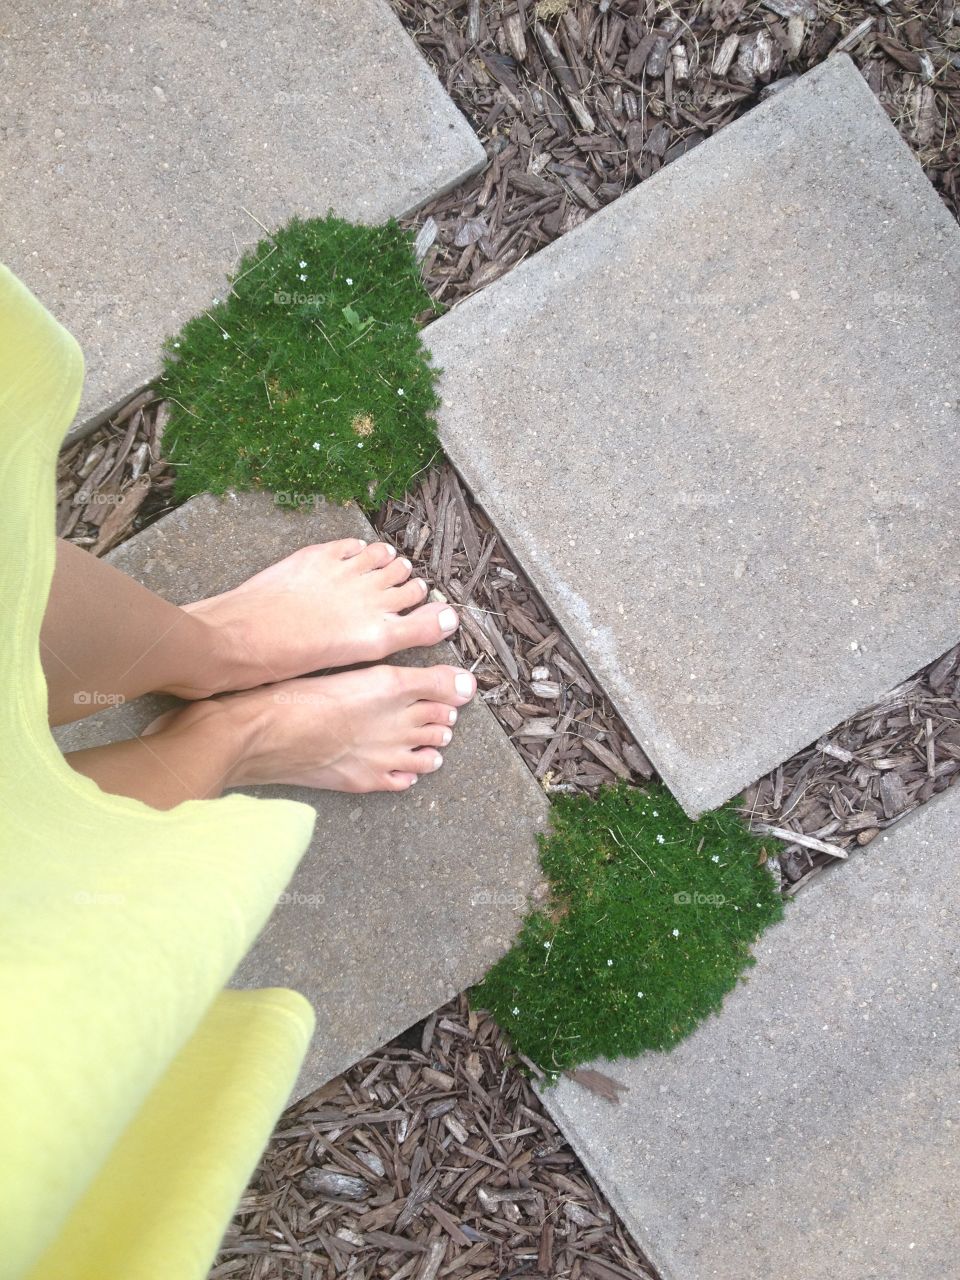 Where I stand: barefoot on pavers,with moss and yellow dress, feet in the garden 